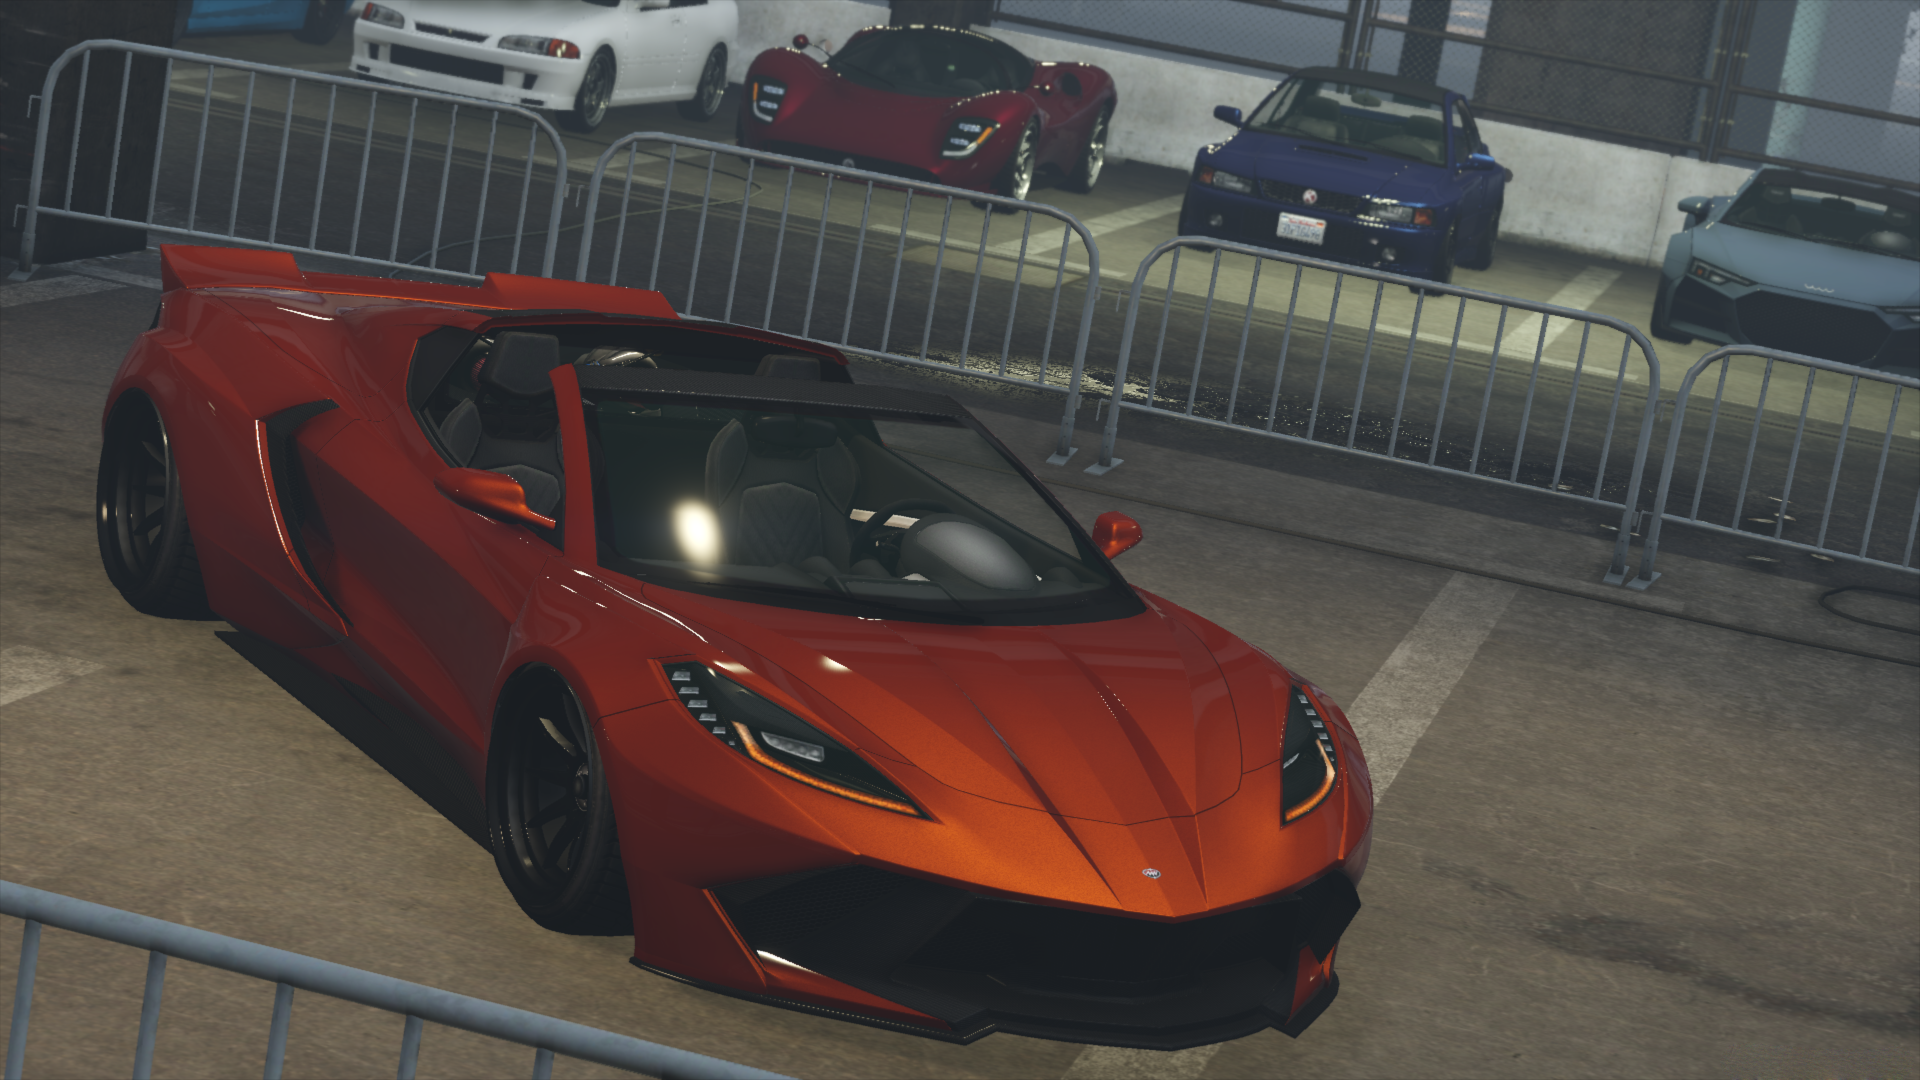 GTA 5 - NEW C8 Invetero Coquette D10 Cruise!! They ADDED NEW